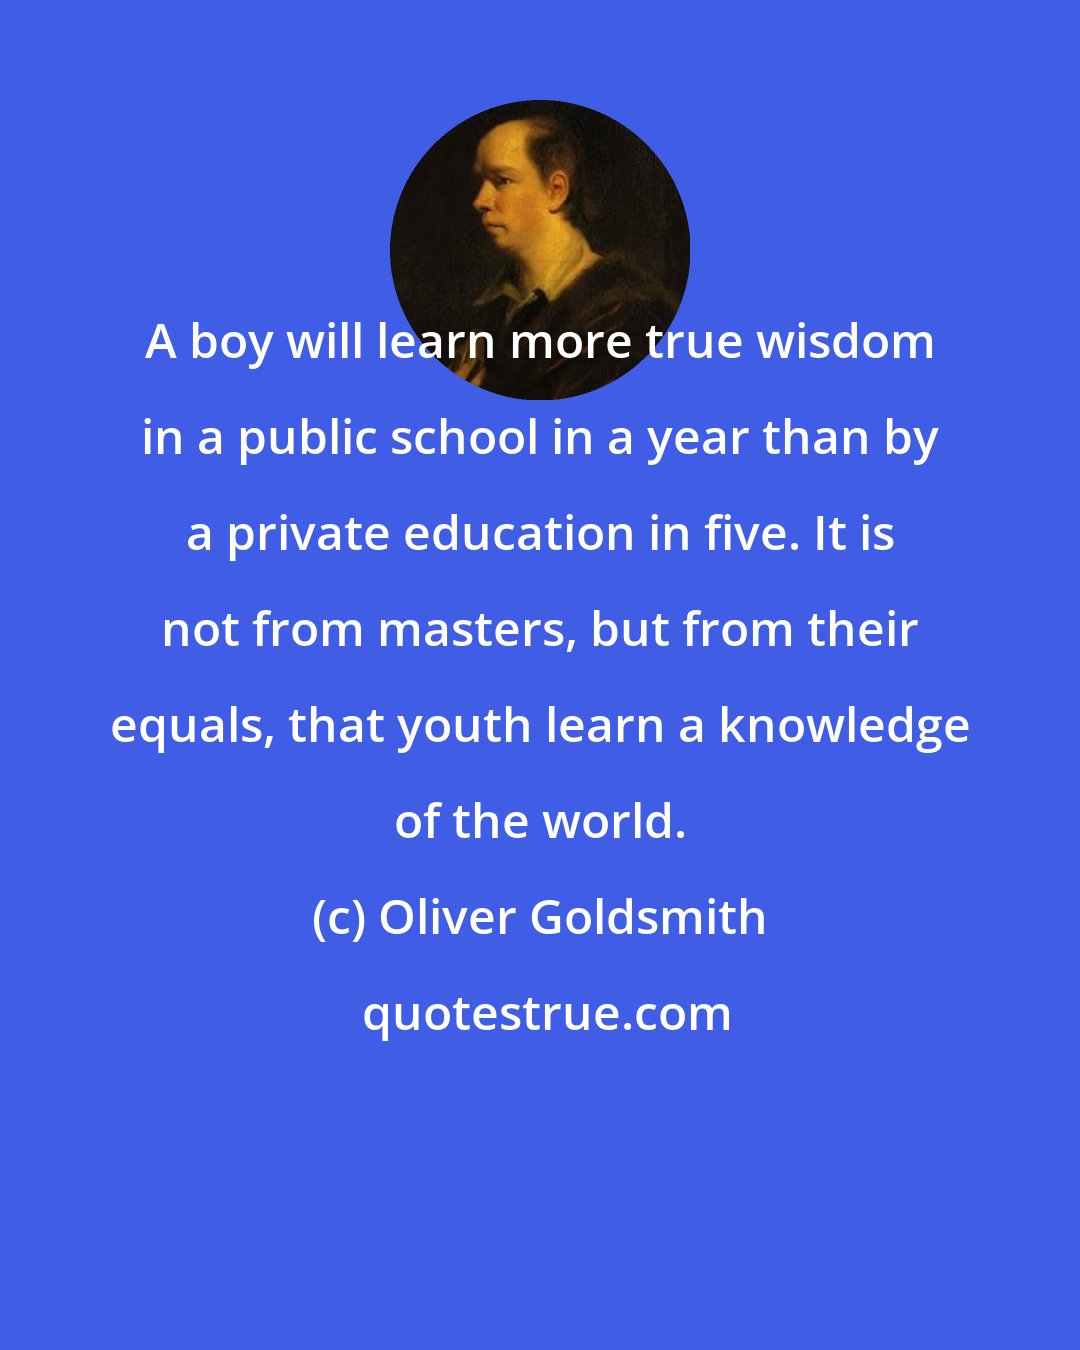 Oliver Goldsmith: A boy will learn more true wisdom in a public school in a year than by a private education in five. It is not from masters, but from their equals, that youth learn a knowledge of the world.